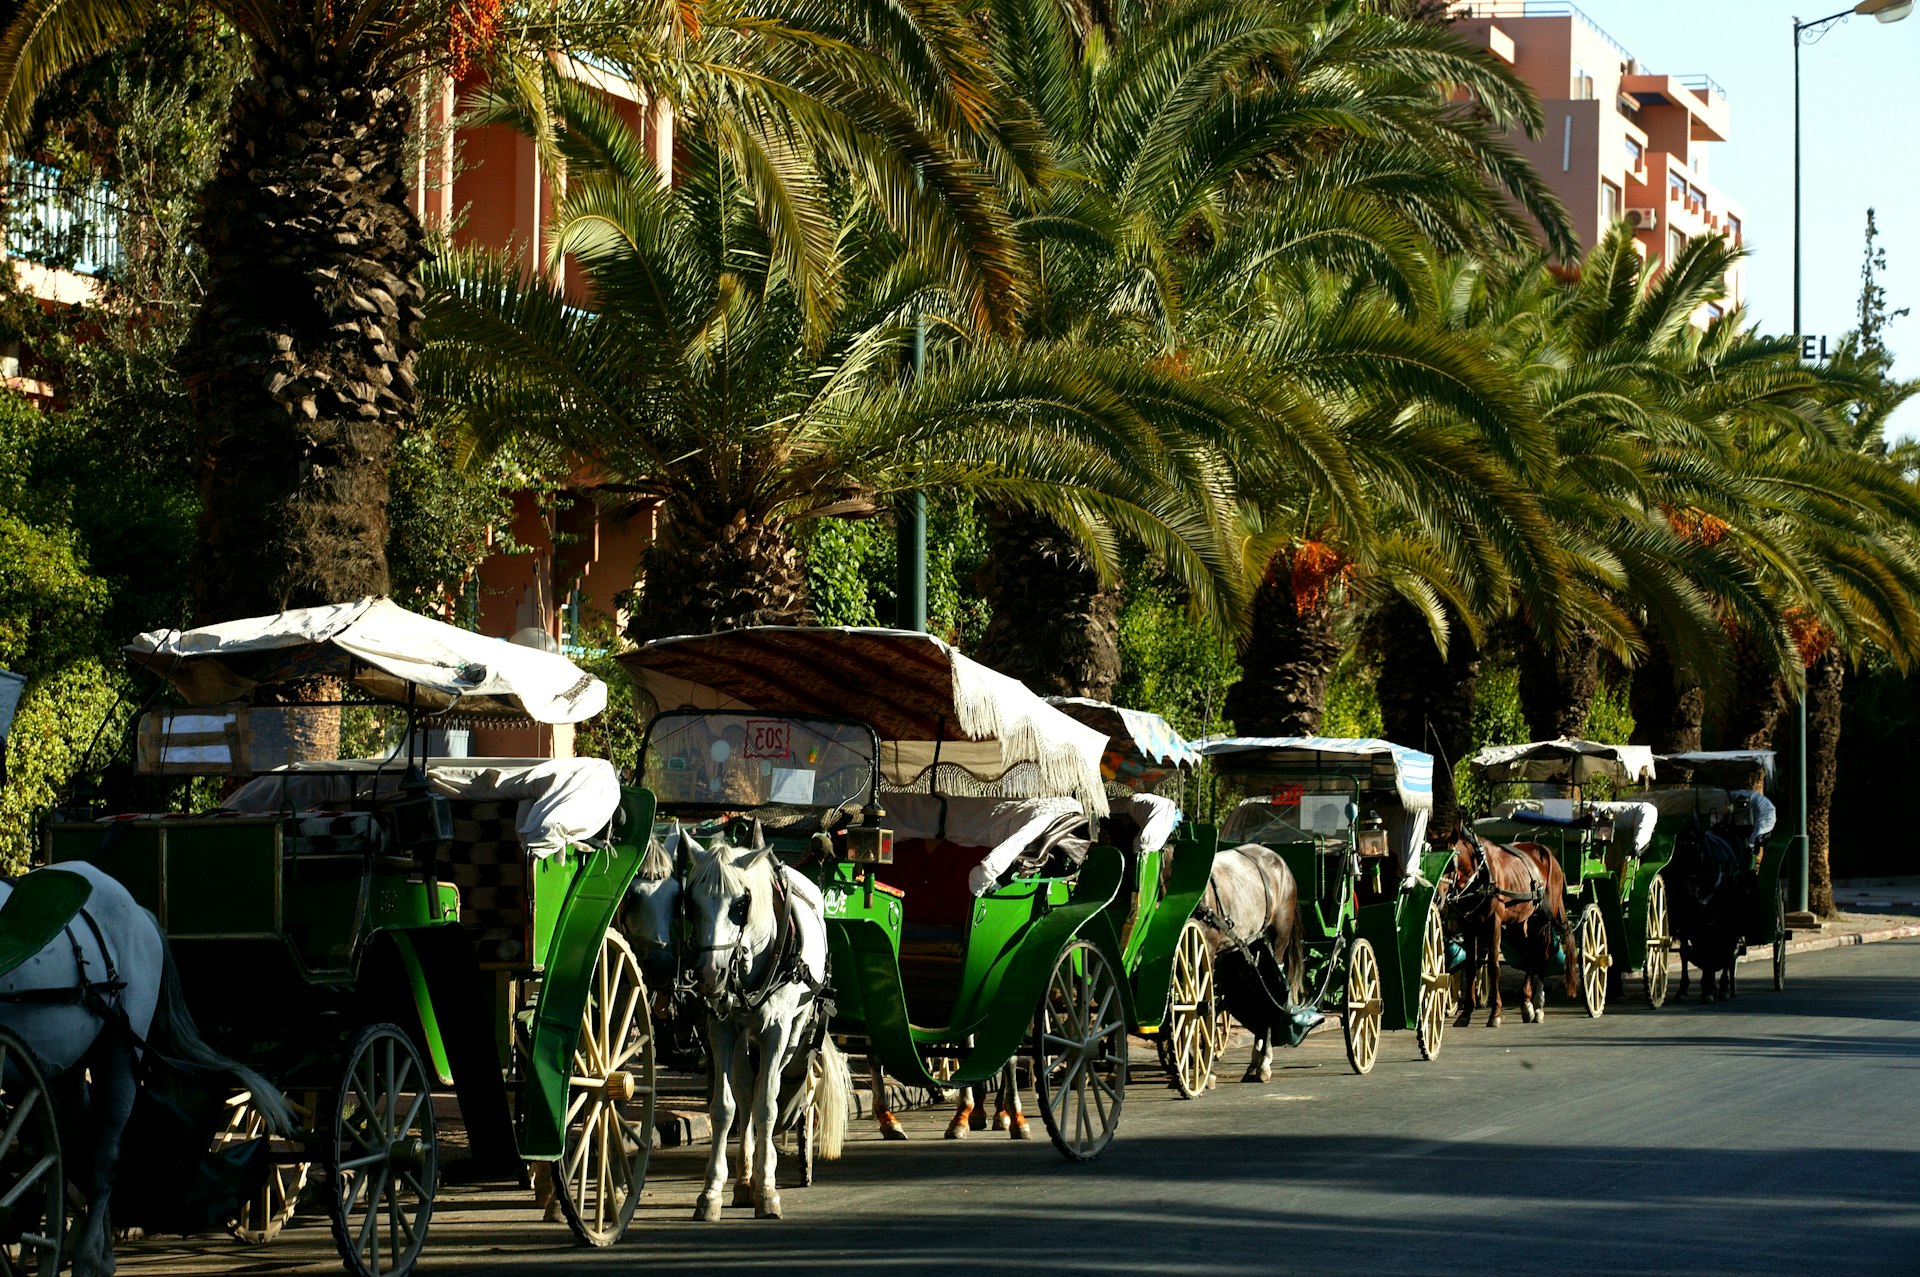 Horse-drawn carriages line up along a road in Marrakesh, Morocco